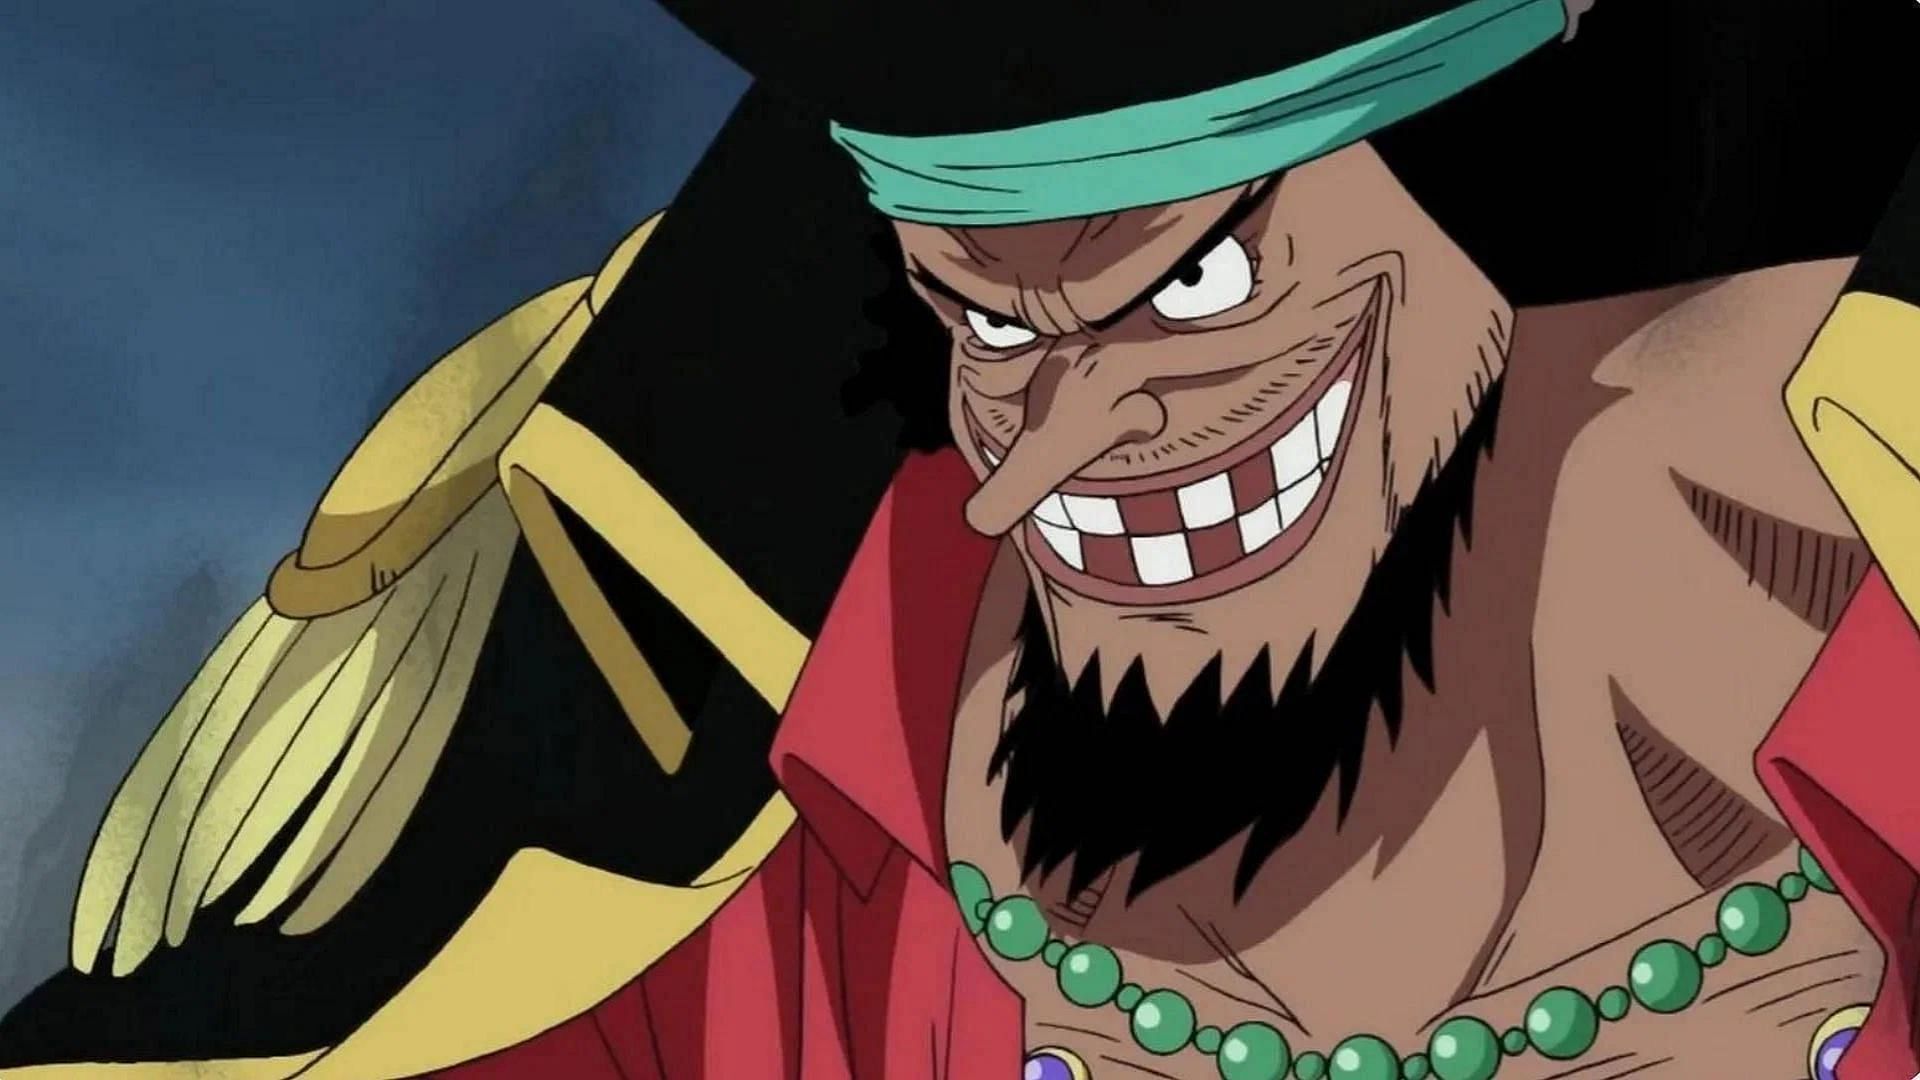 Blackbeard as shown in the anime (Images via Toei Animation)